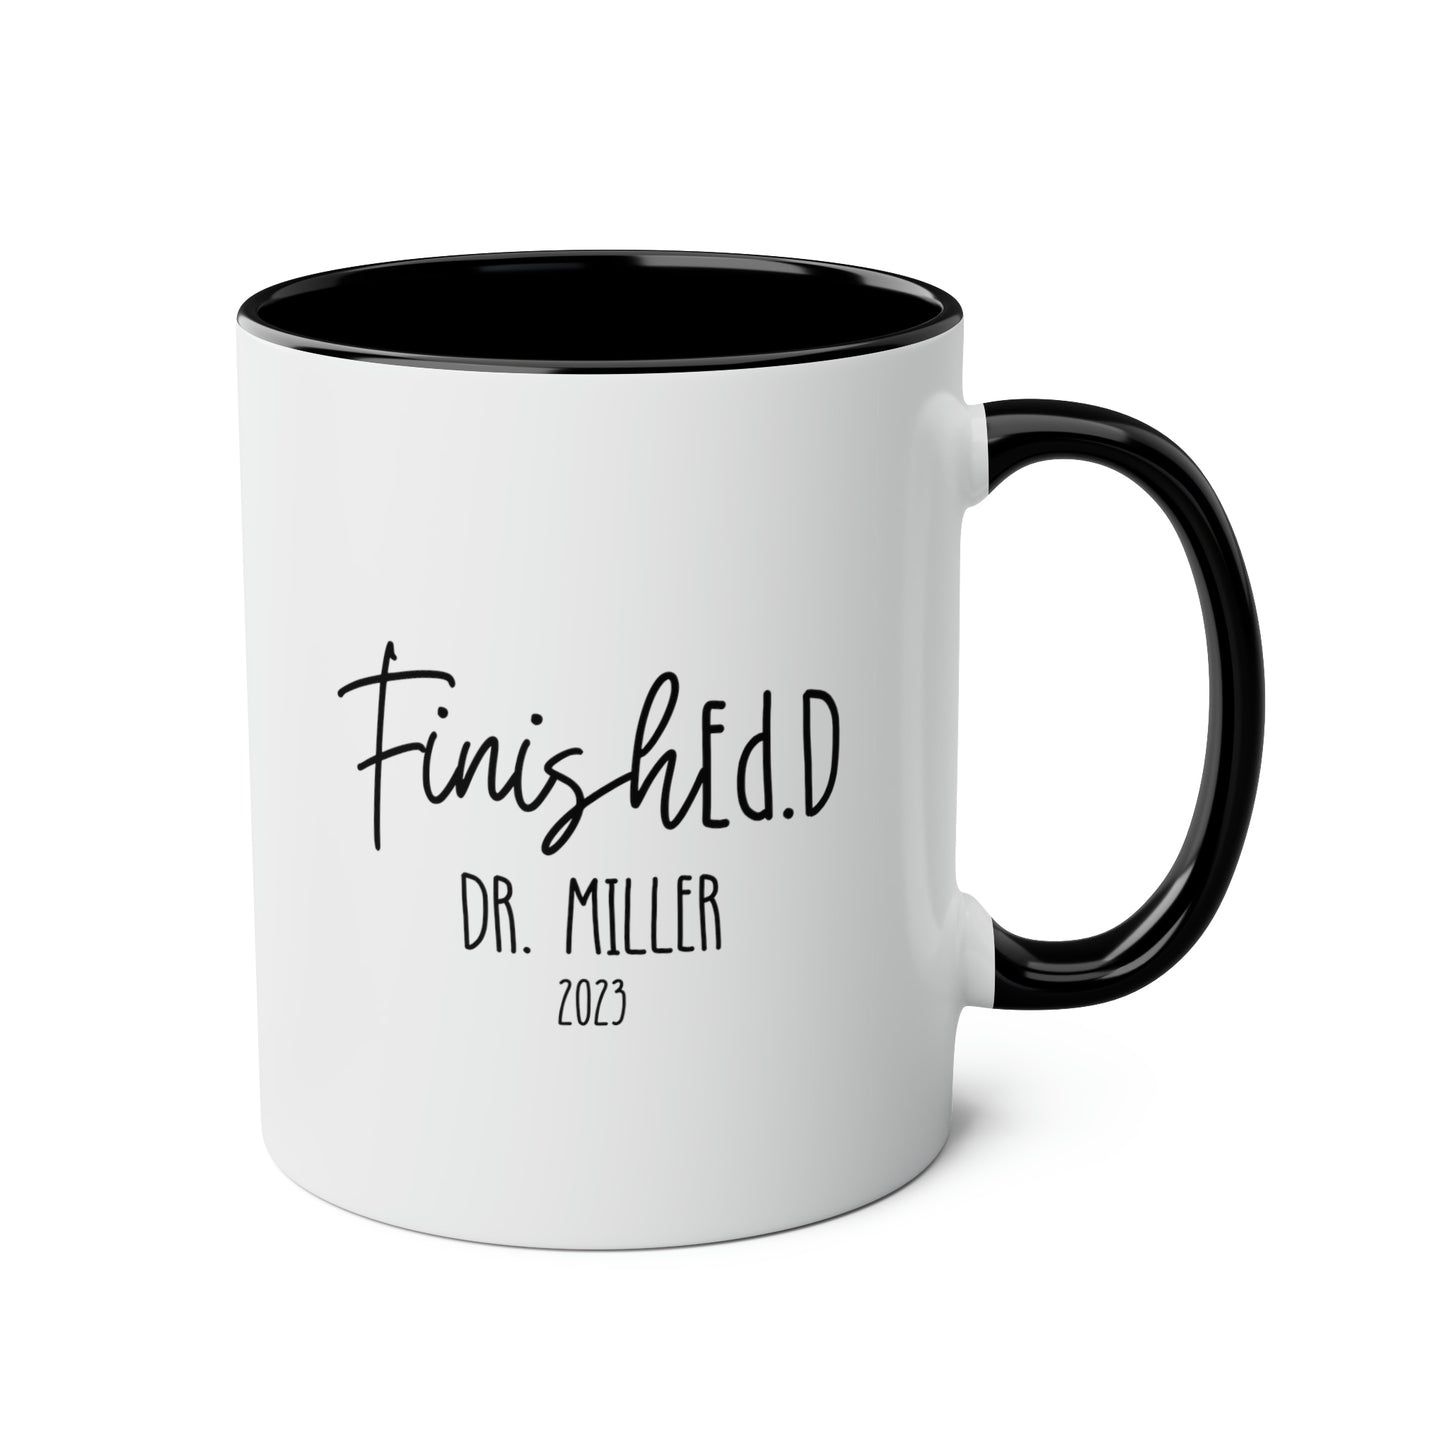 Finished.D 11oz white with black accent funny large coffee mug gift for doctorate graduation personalized Edd new doctor of education custom graduate doctoral personalized waveywares wavey wares wavywares wavy wares